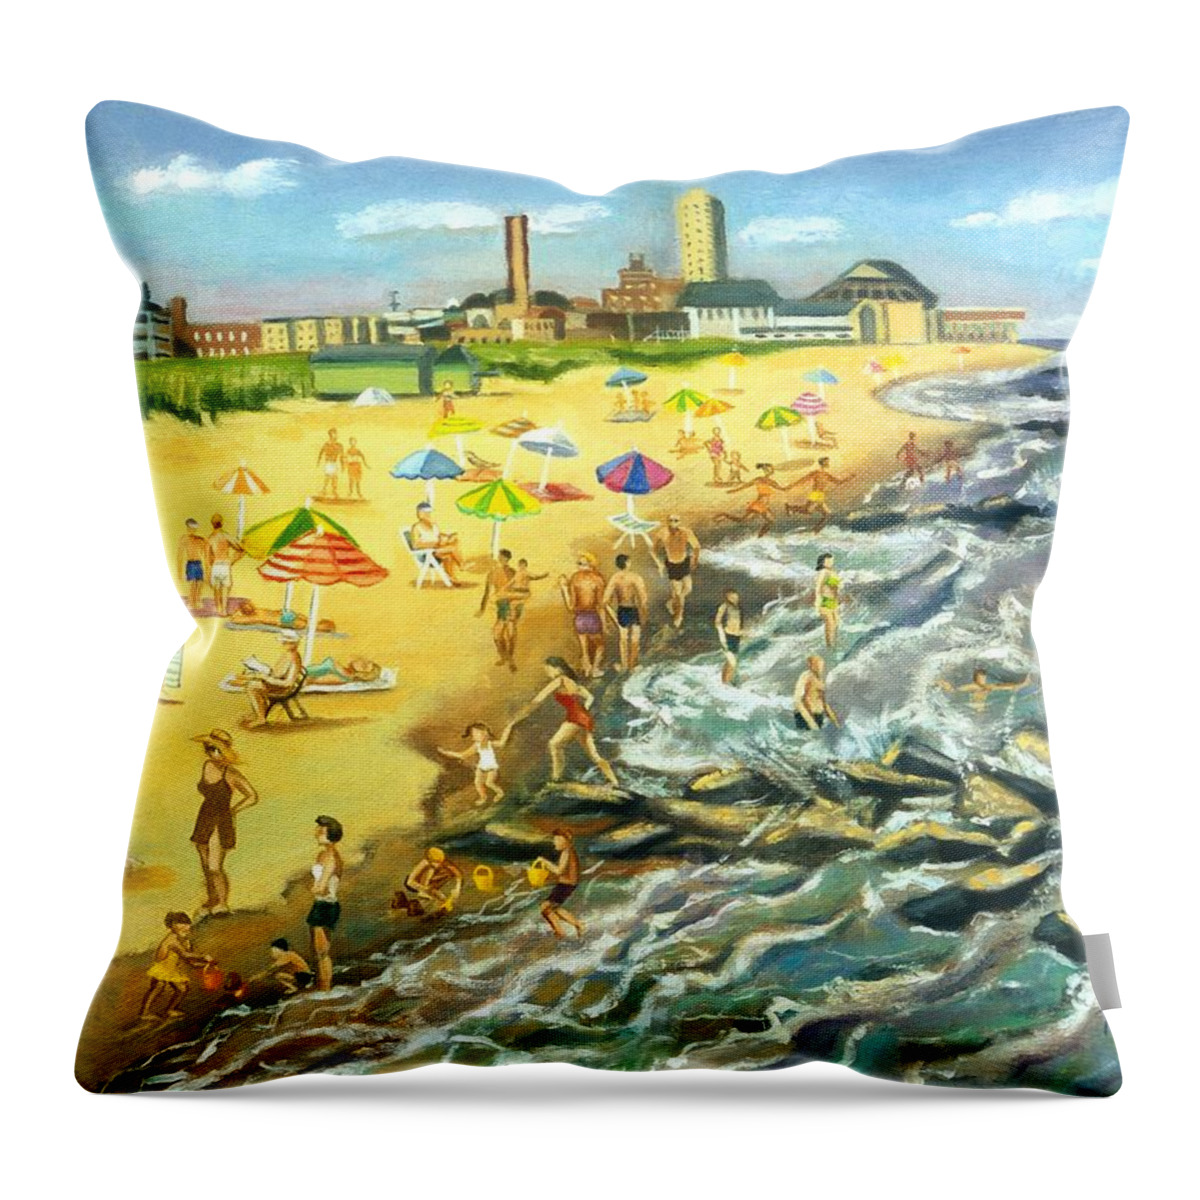 Beach Throw Pillow featuring the painting The Beach At Ocean Grove by Madeline Lovallo